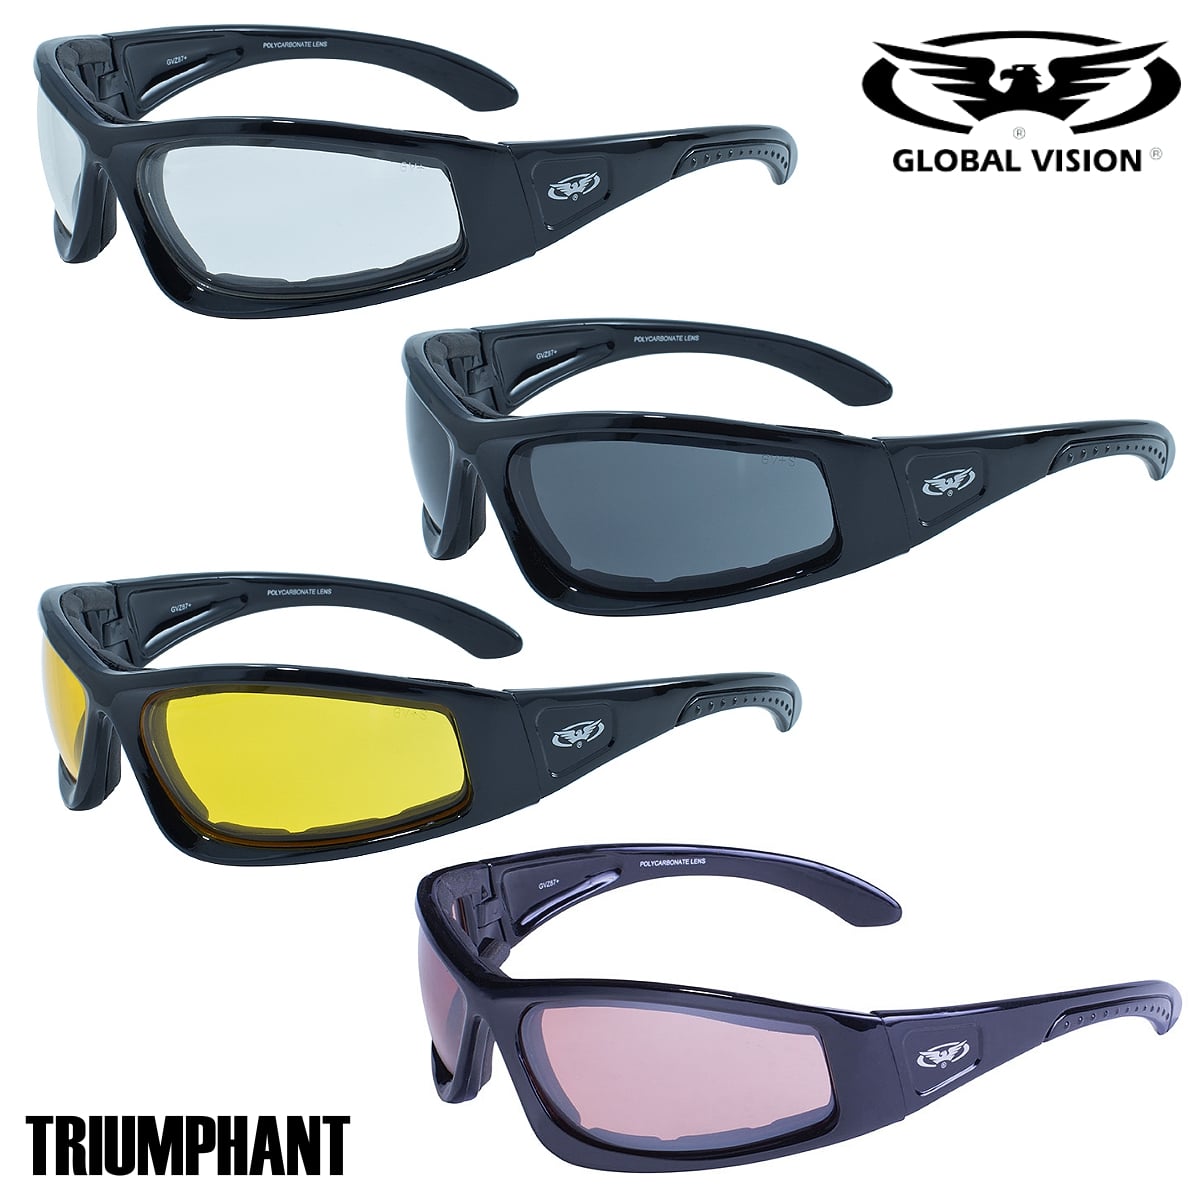 GLOBAL VISION oCN TOX S[O Triumphant Sunglass čA! YJ[S4F! ubNt[ IׂcȂ! O[orW gCAt@g ANSI Z87.1 KiK UV400 Uh~H ώC Motorcycle Safety Sunglasses